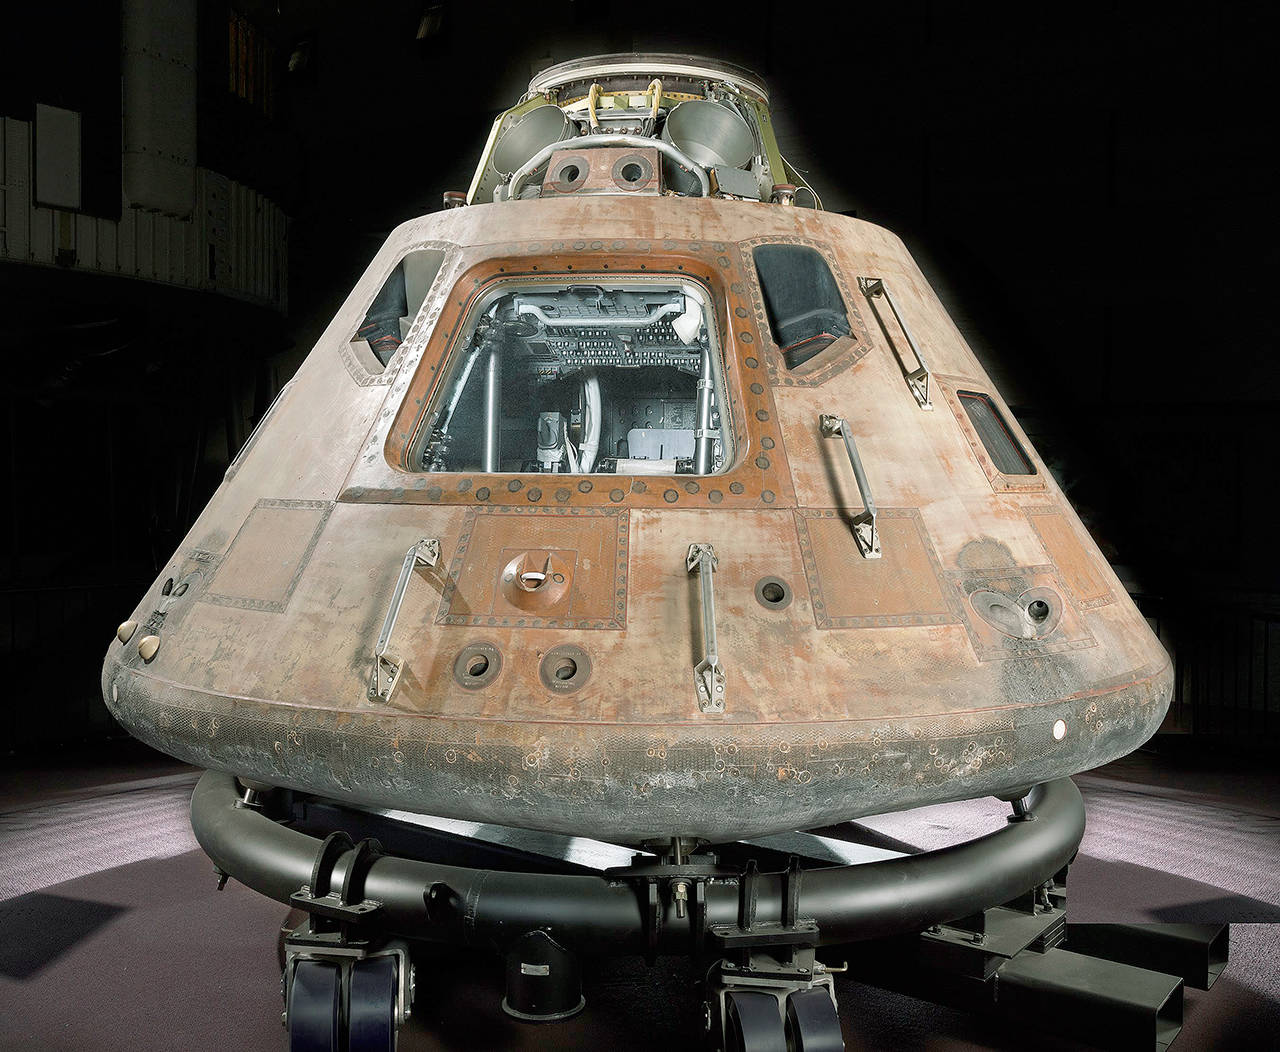 The Apollo 11 command module Columbia will be on display at the Museum of Flight. Photo by Eric Long, National Air and Space Museum, Smithsonian Institution